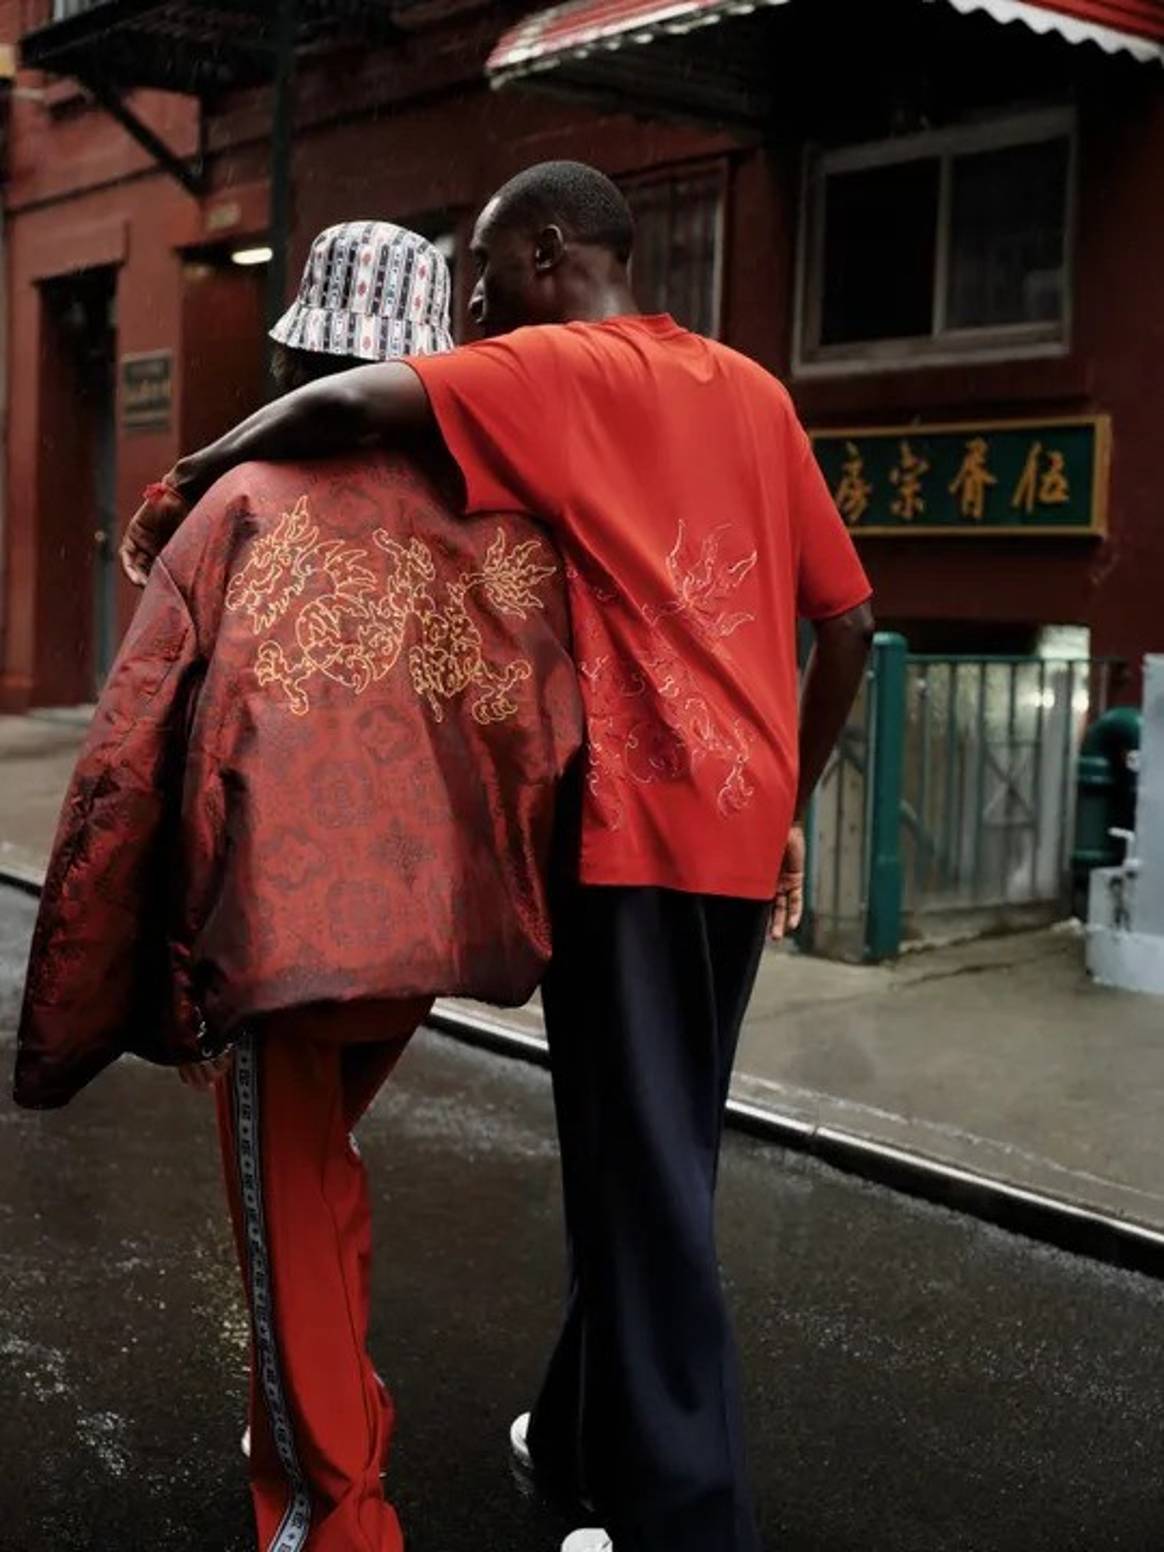 Tommy Hilfiger x Clot, Lunar New Year campaign imagery.